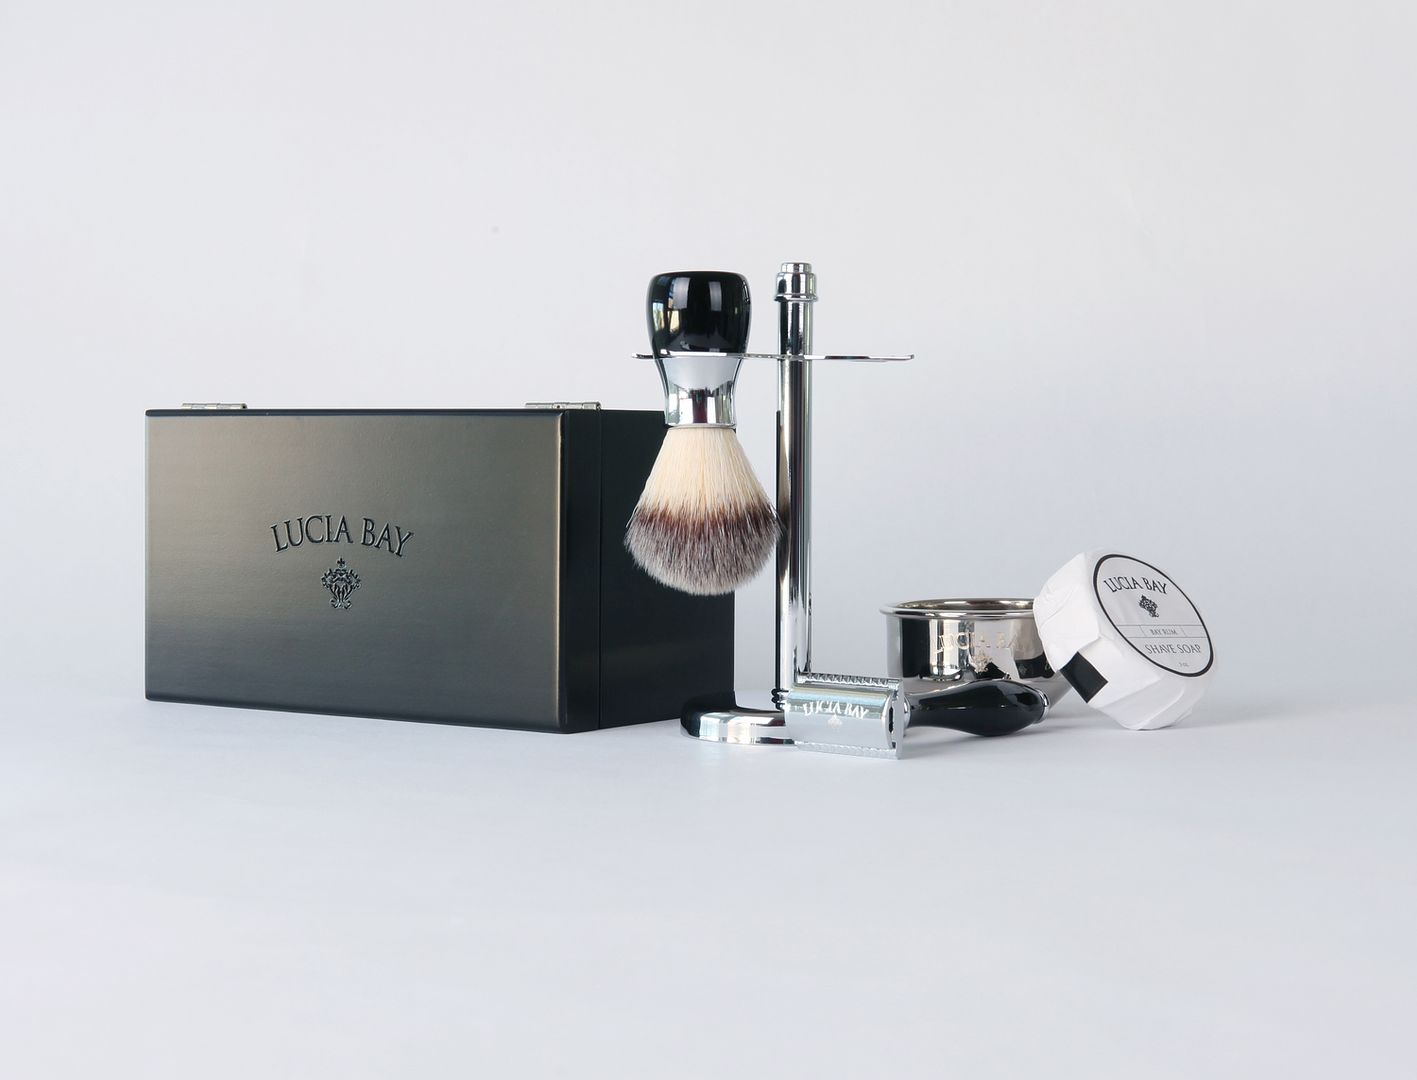 Lucia Bay Shave Set | Father's Day gifts for Grandpas